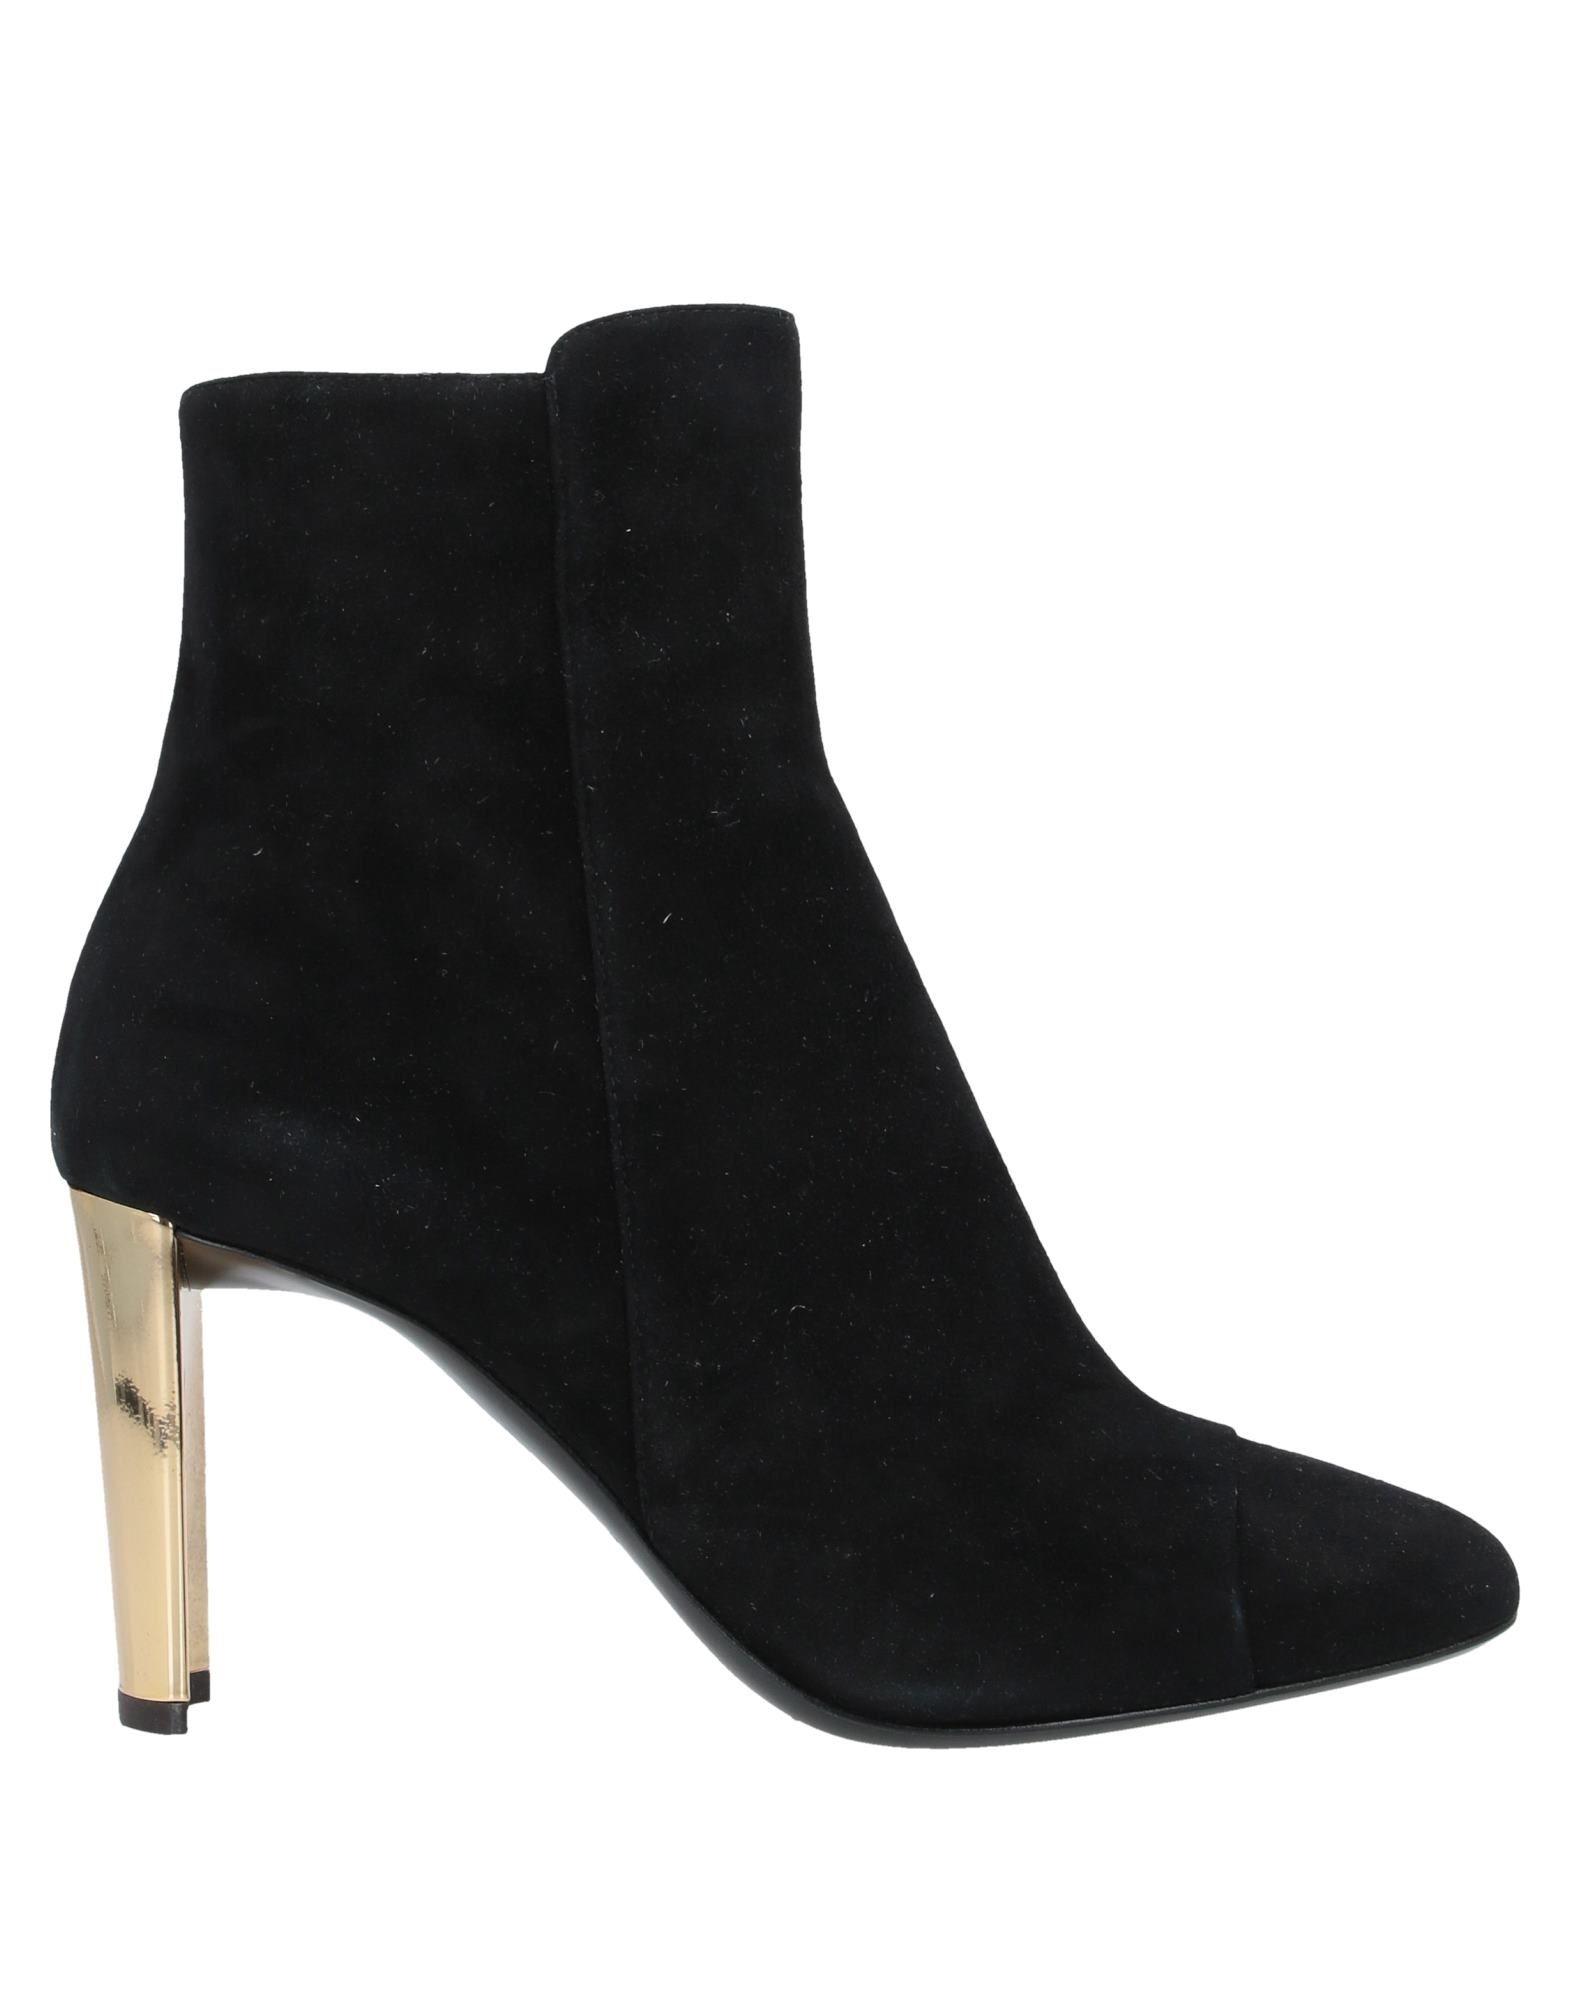 Giuseppe Zanotti Leather Ankle Boots in Black - Lyst